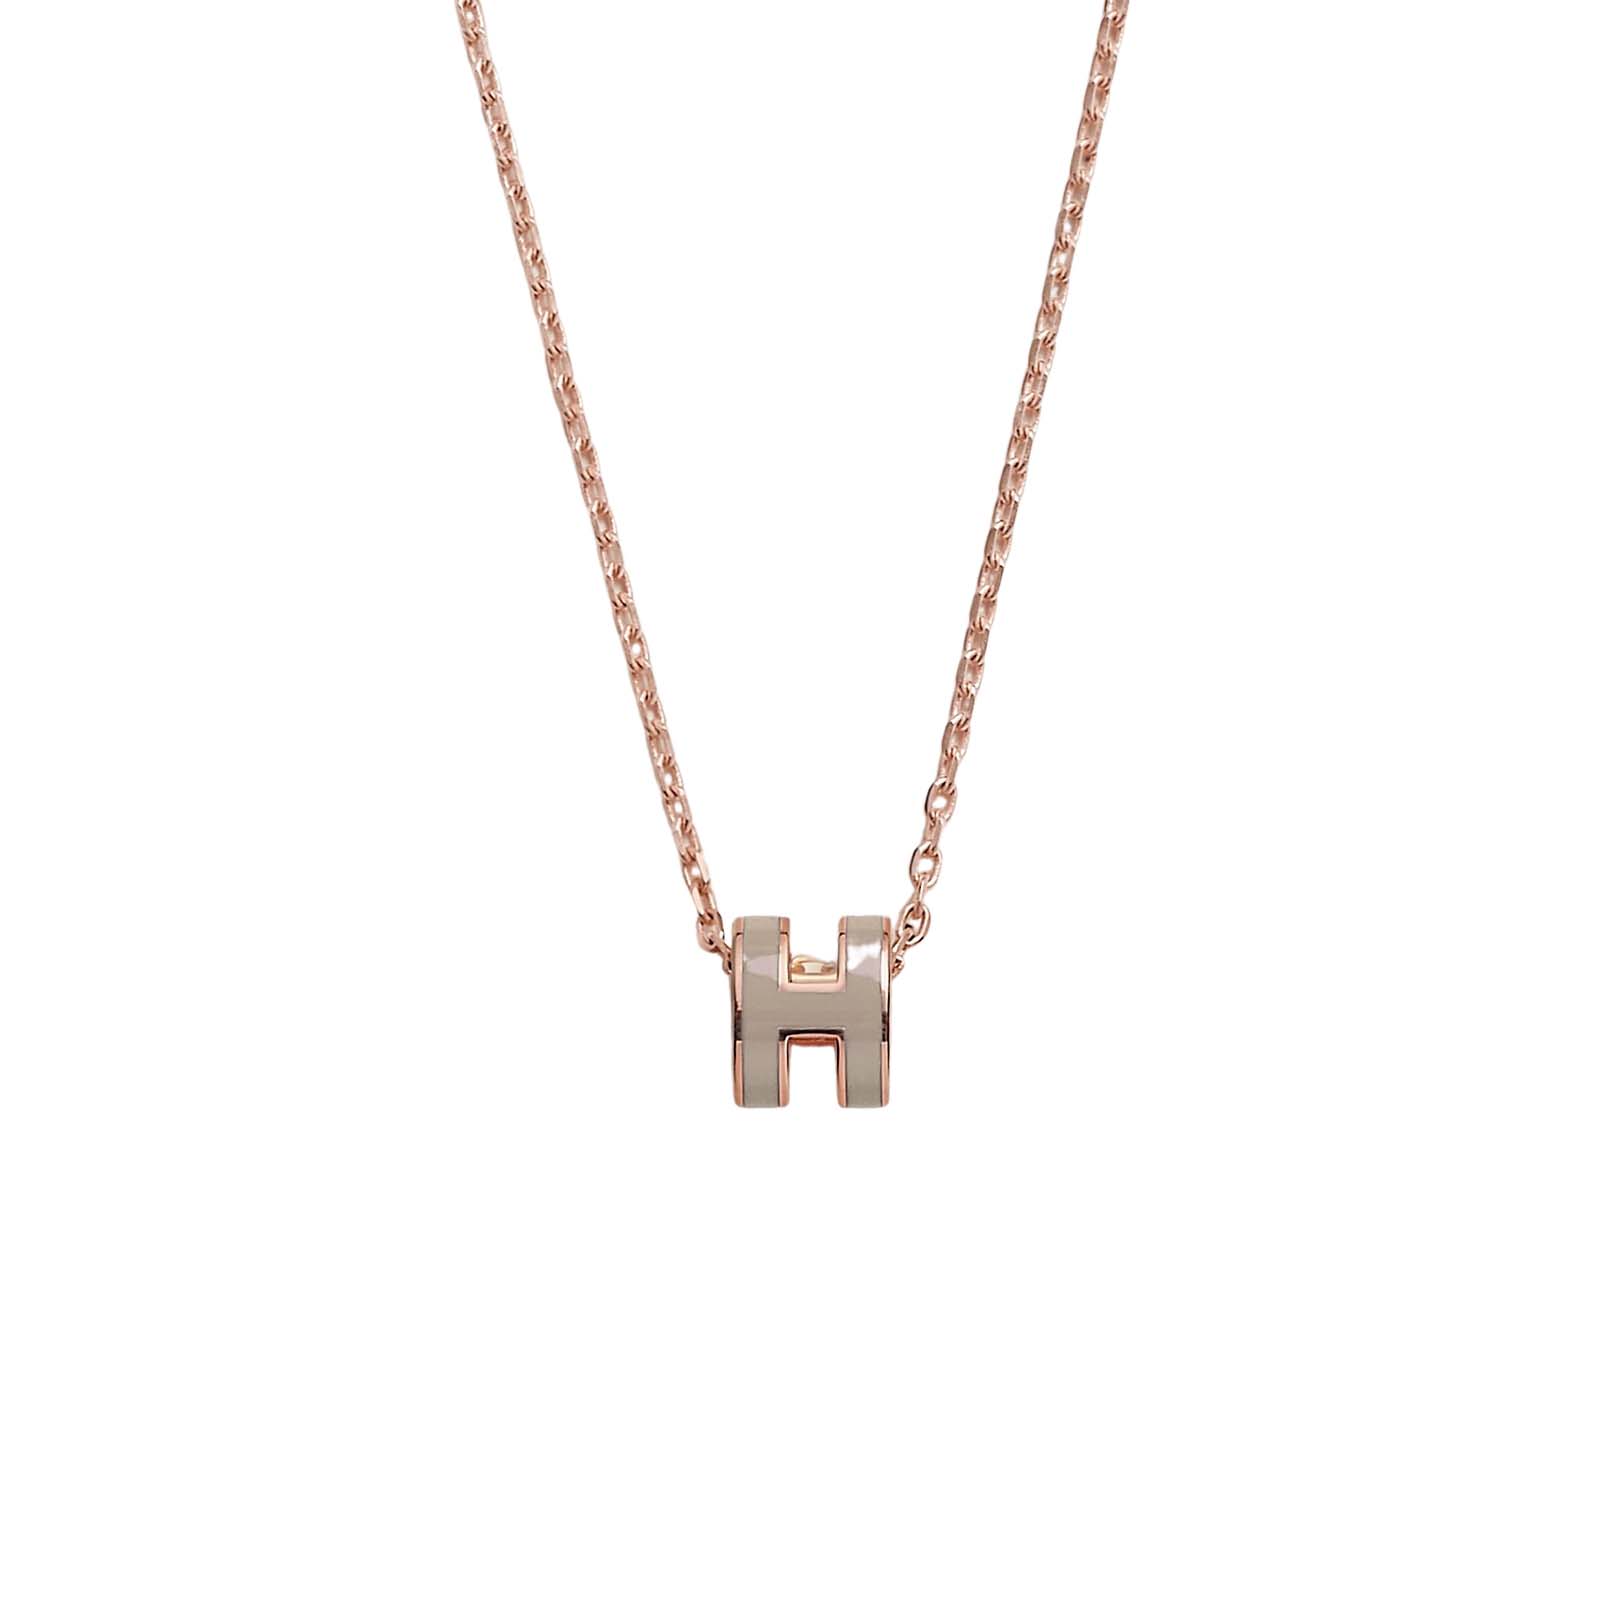 HERMÈS | POP H PENDANT NECKLACE IN CELESTE LACQUERED METAL WITH ROSE GOLD  PLATED HARDWARE, 2019 | Handbags and Accessories | 2020 | Sotheby's